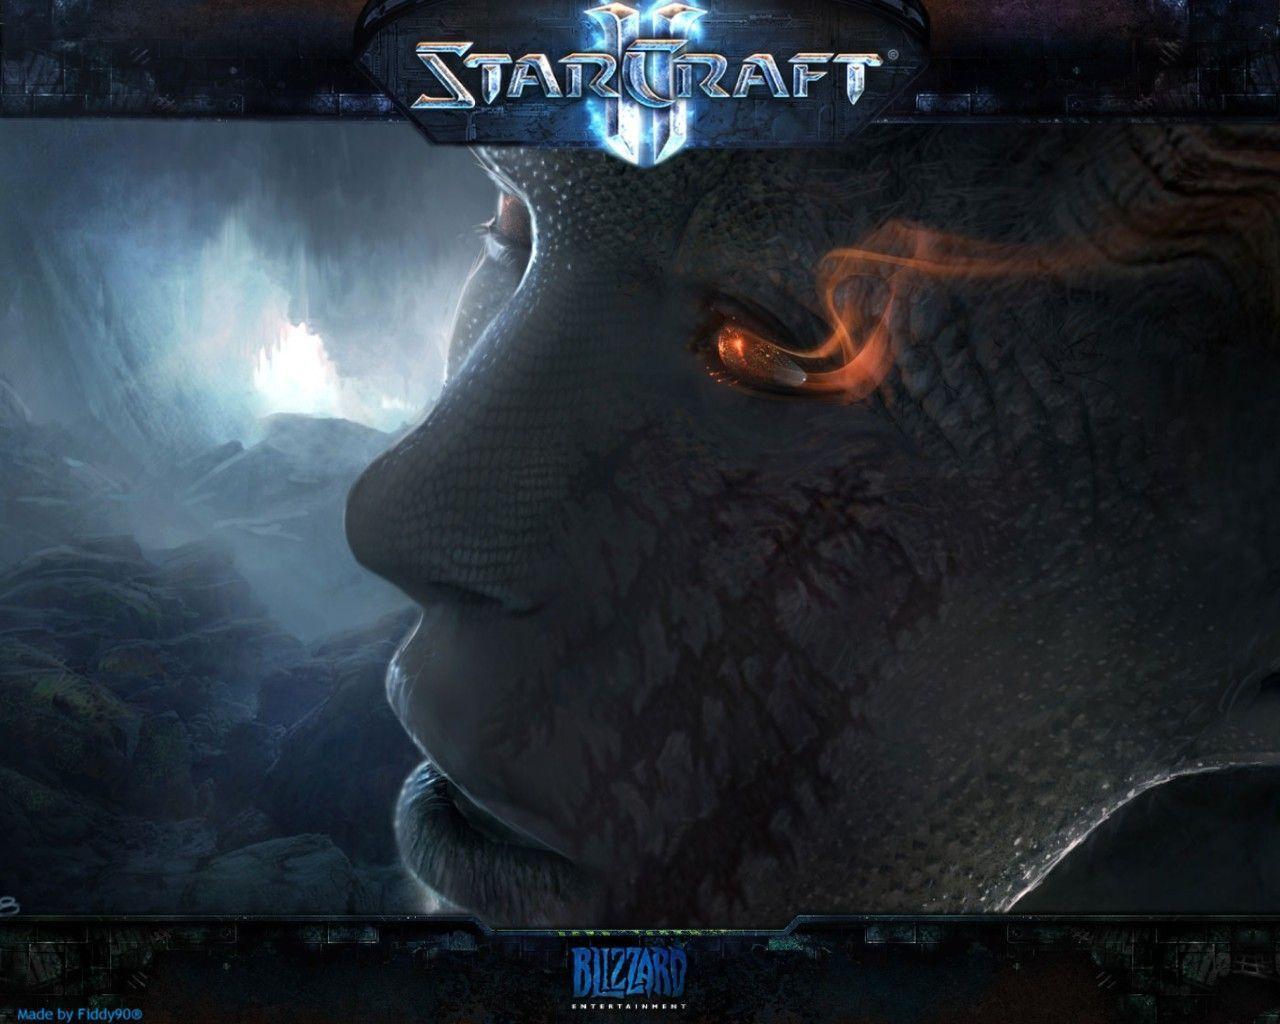 Cool StarCraft 2 Wallpaper And Background. The Design Work